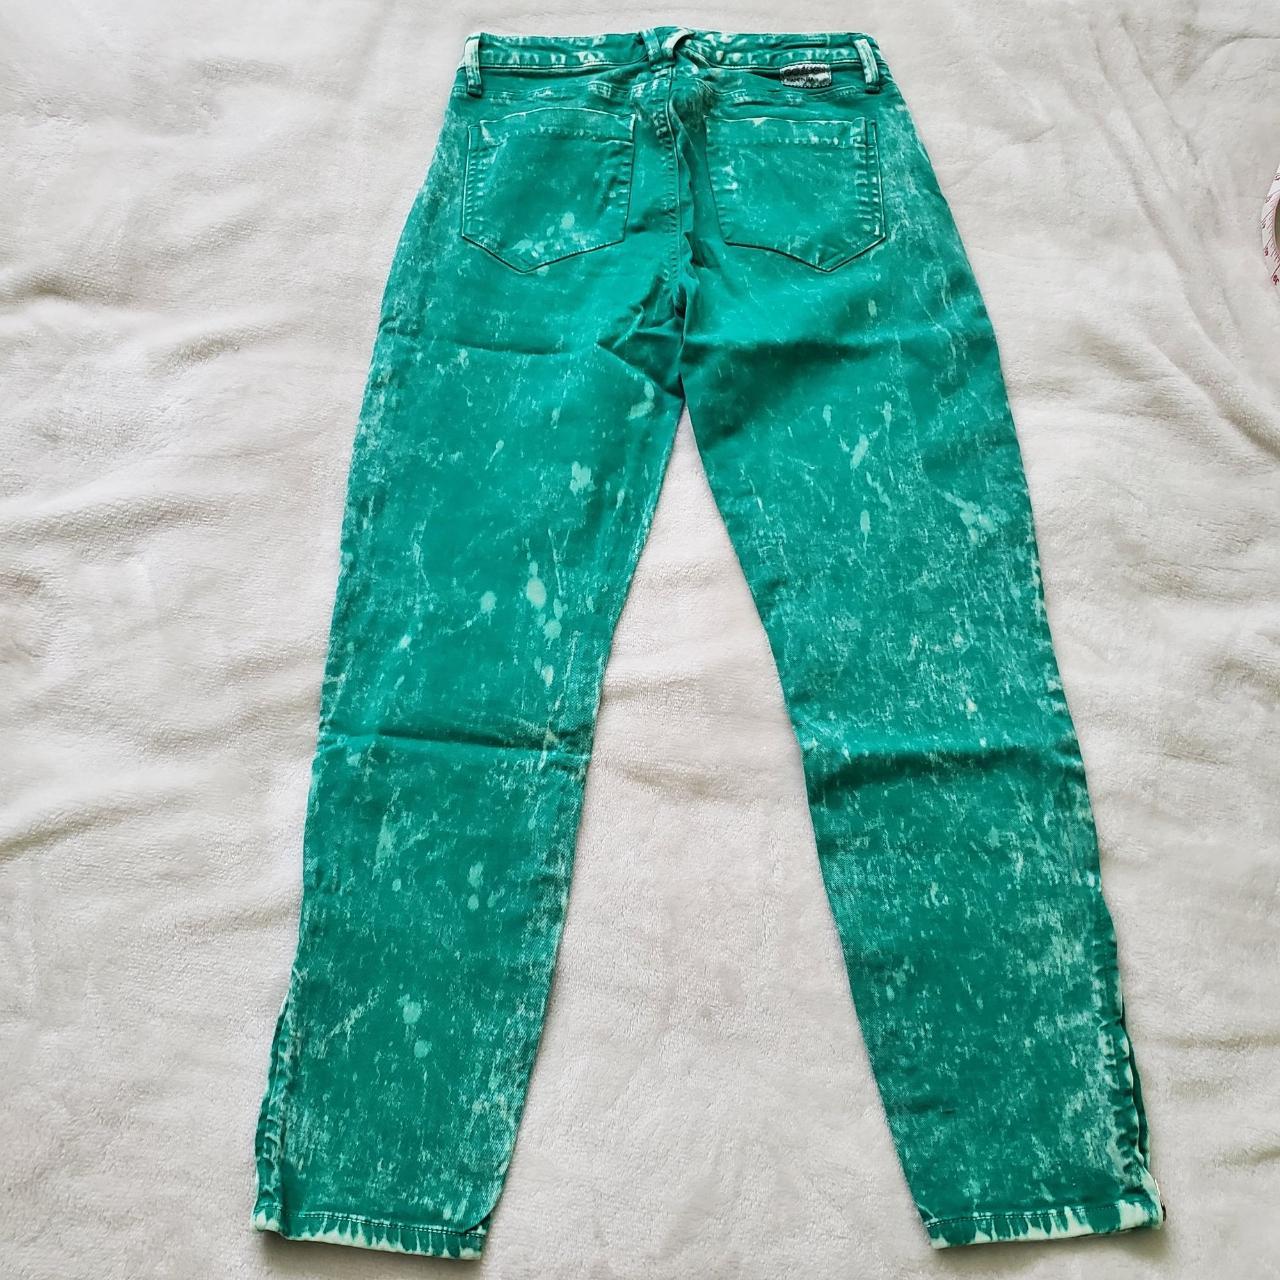 Product Image 2 - Goldsign glam jeans
Size 27
Green color
Bleached
Stretchy
5